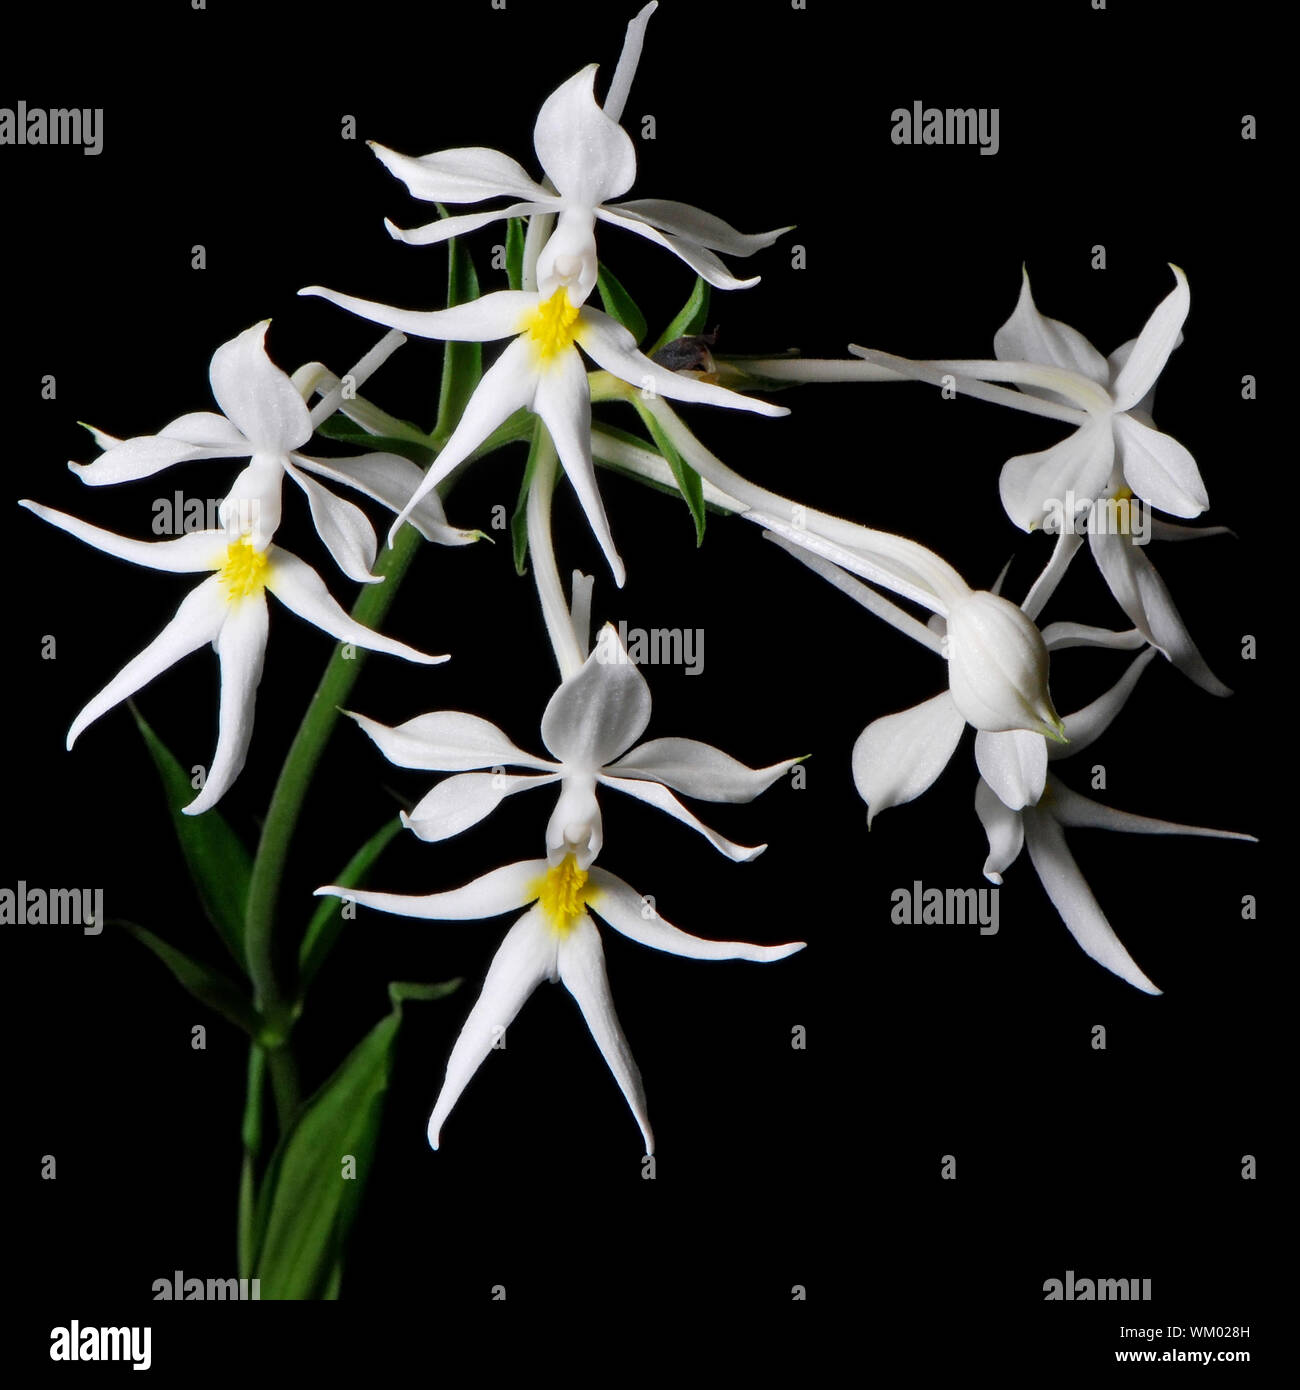 Beautiful white and yellow ground orchid flower, Calanthe leonidii, isolated on a black background Stock Photo